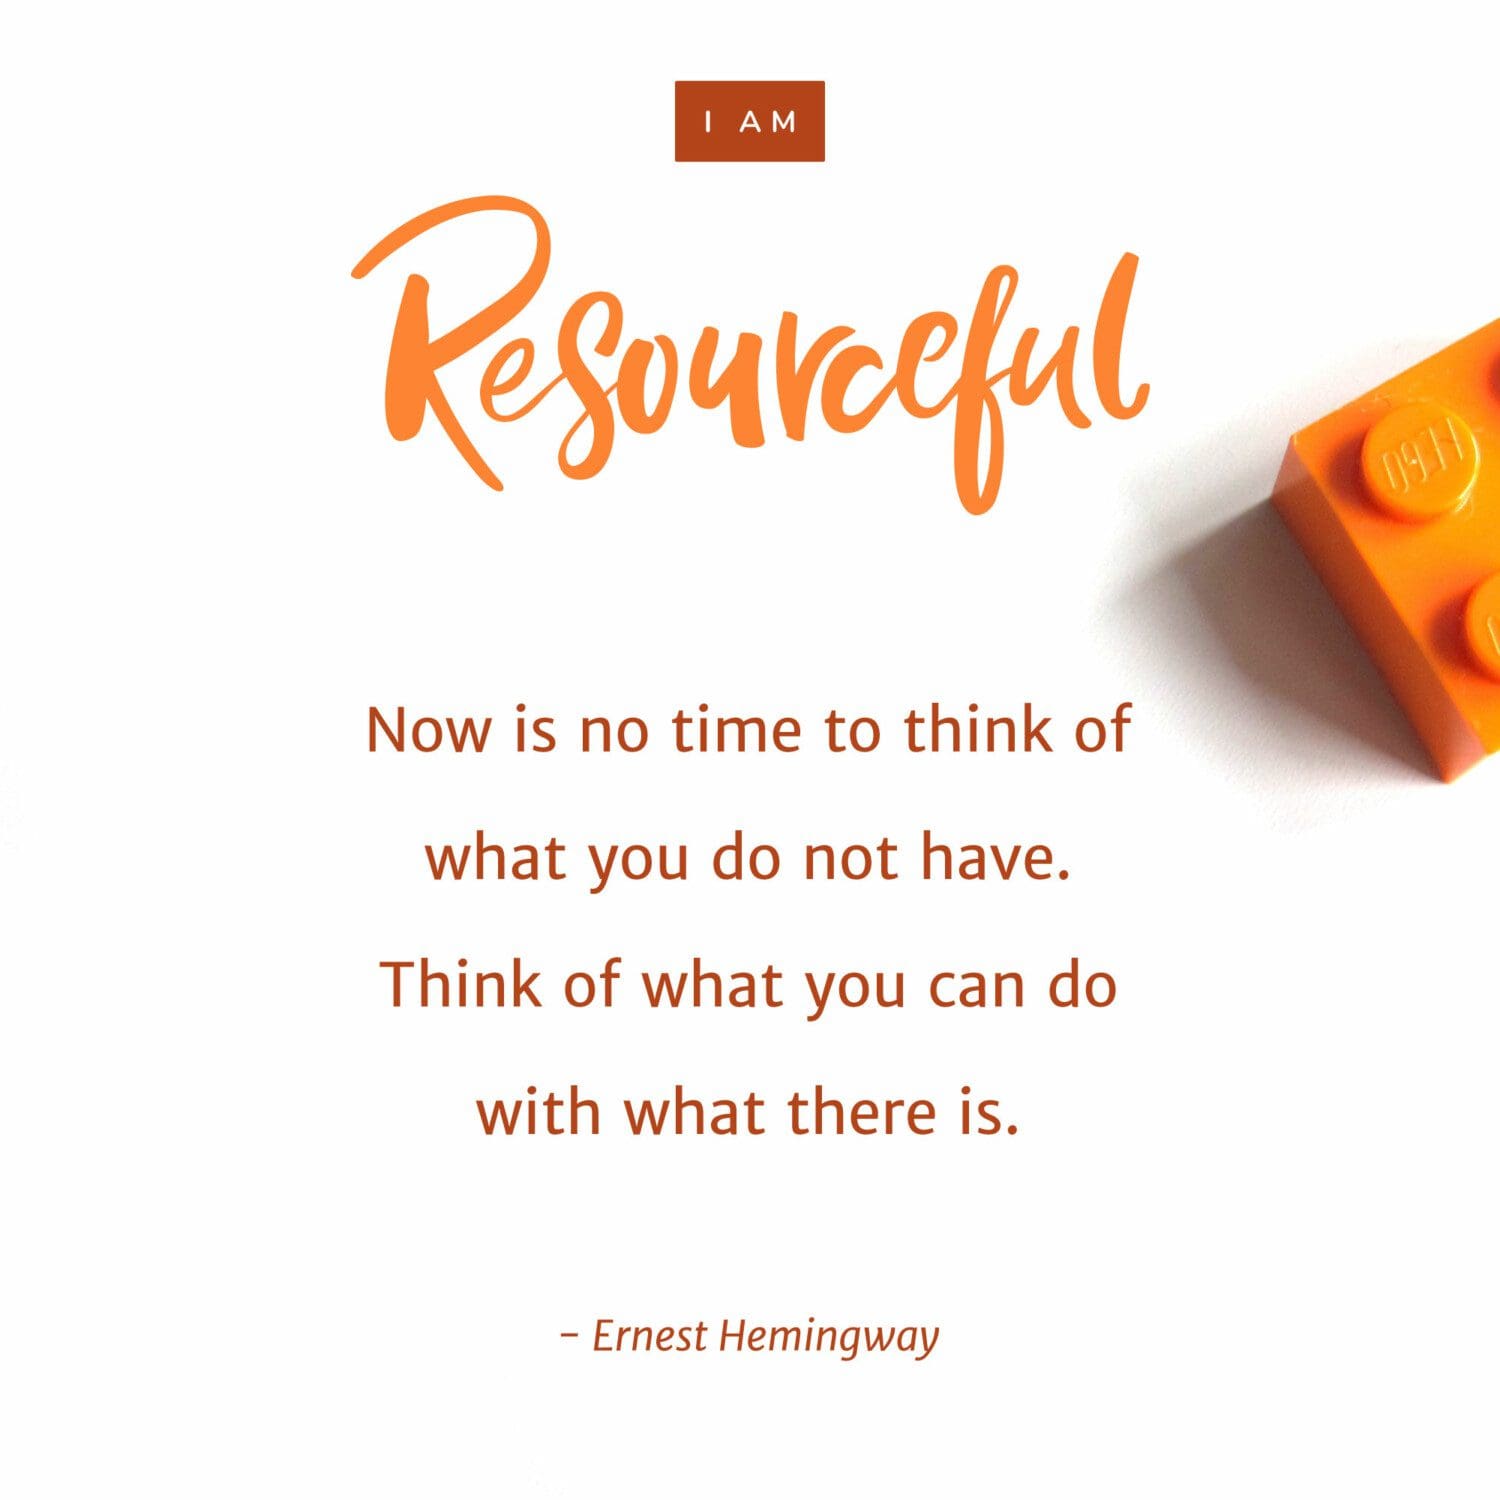 “Now is no time to think of what you do not have. Think of what you can do with what there is.“ – Ernest Hemingway